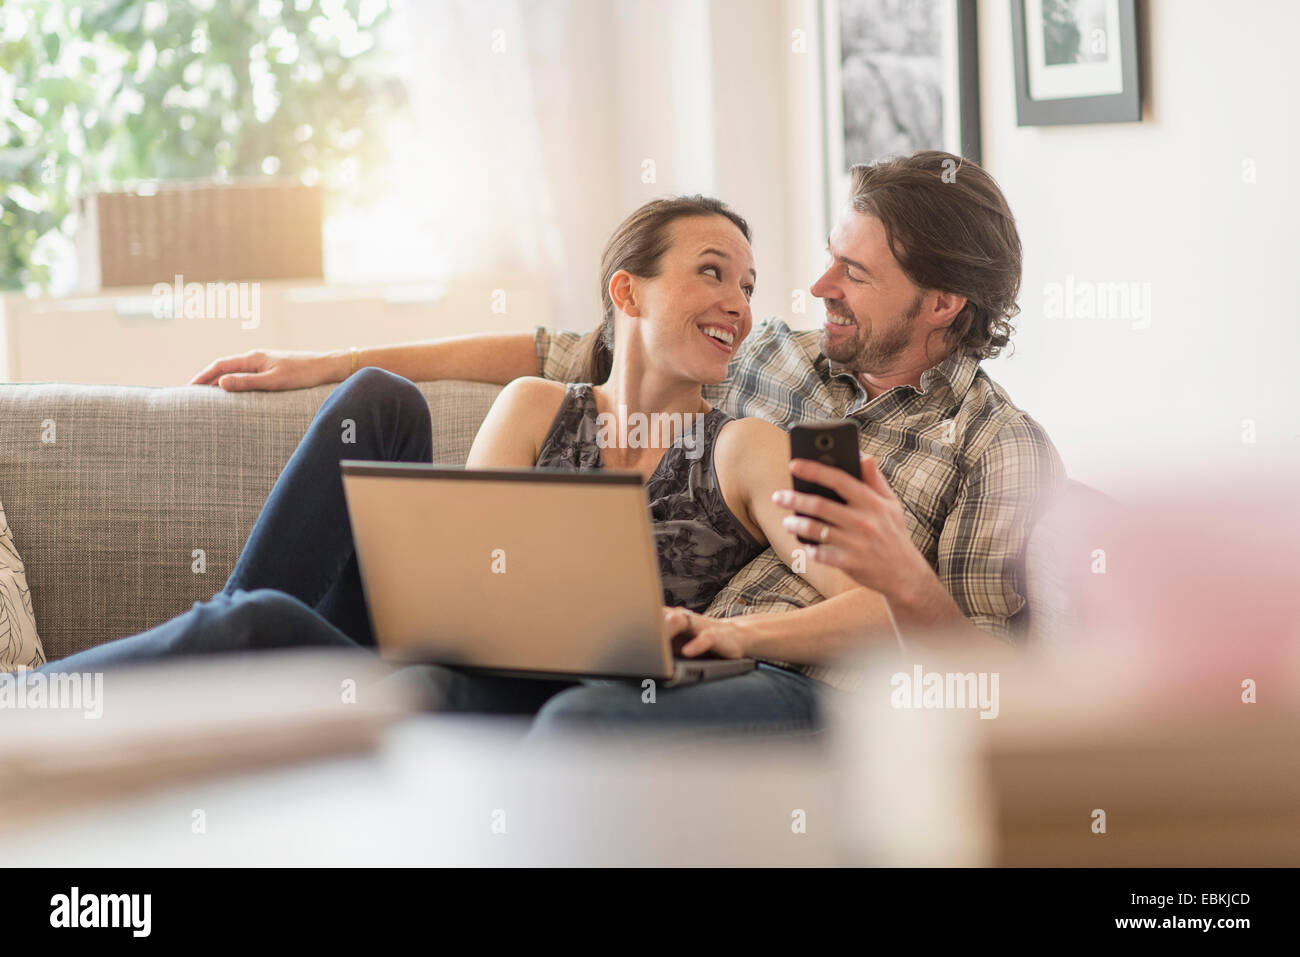 Cheerful couple on sofa with laptop and mobile phone Stock Photo